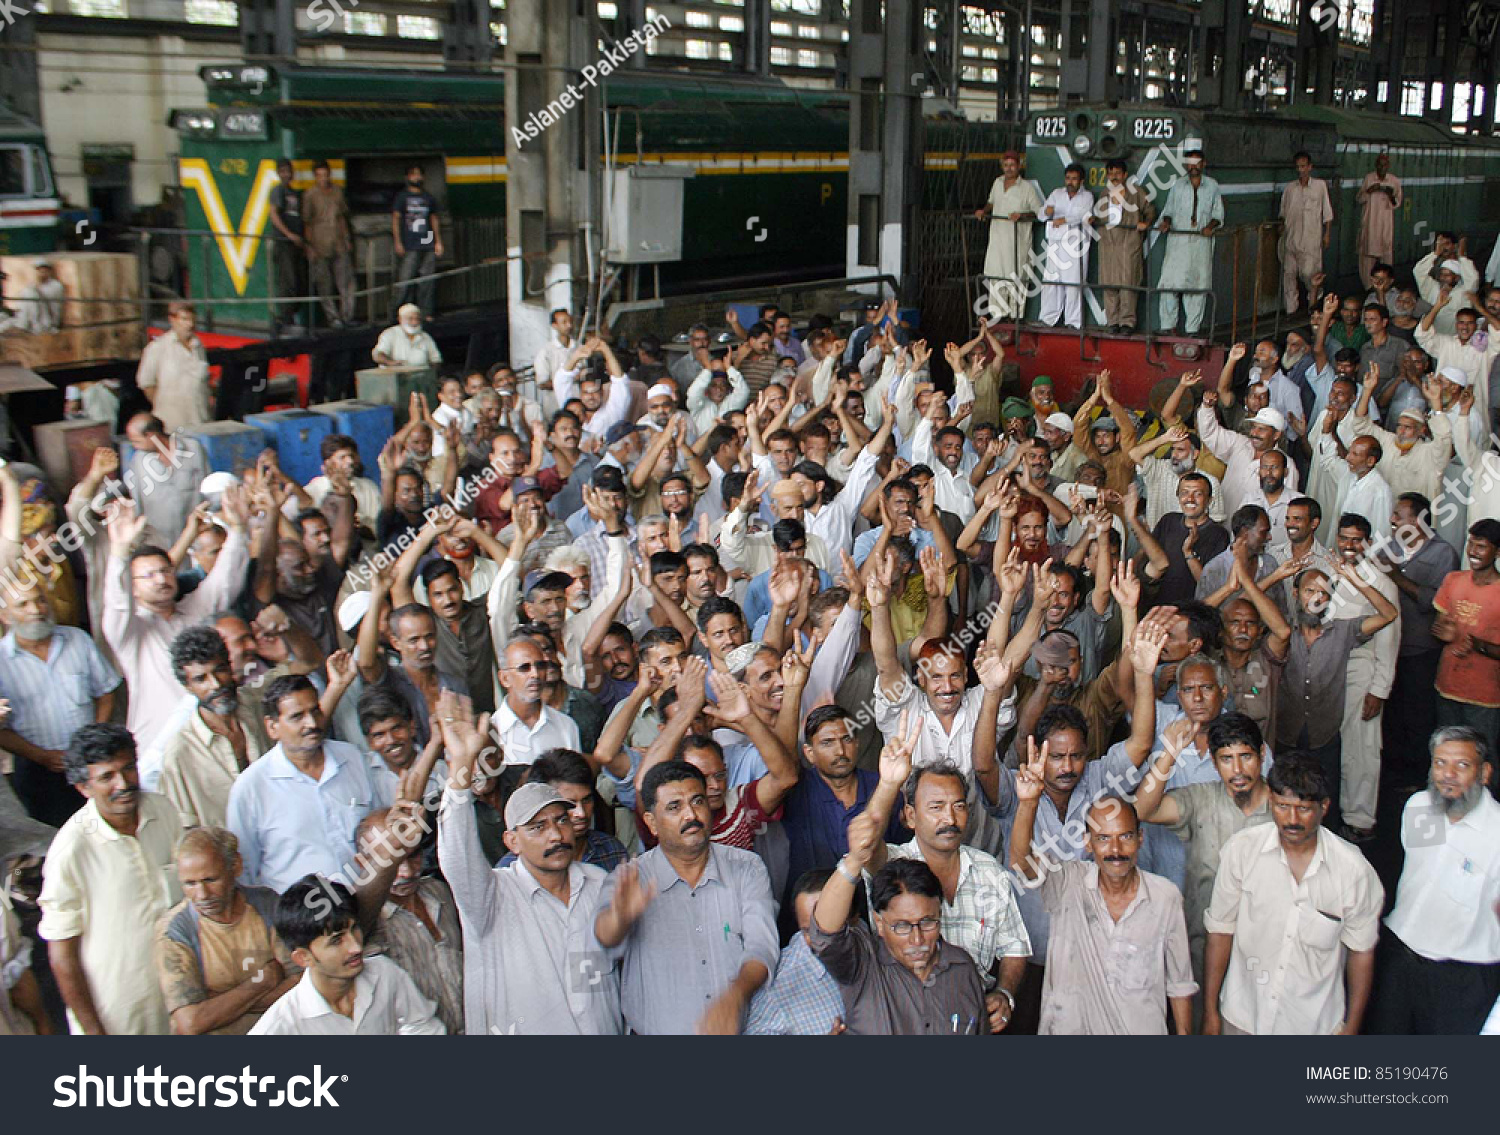 stock-photo-karachi-pakistan-sept-employees-of-railway-are-protesting-against-non-payment-of-their-85190476.jpg